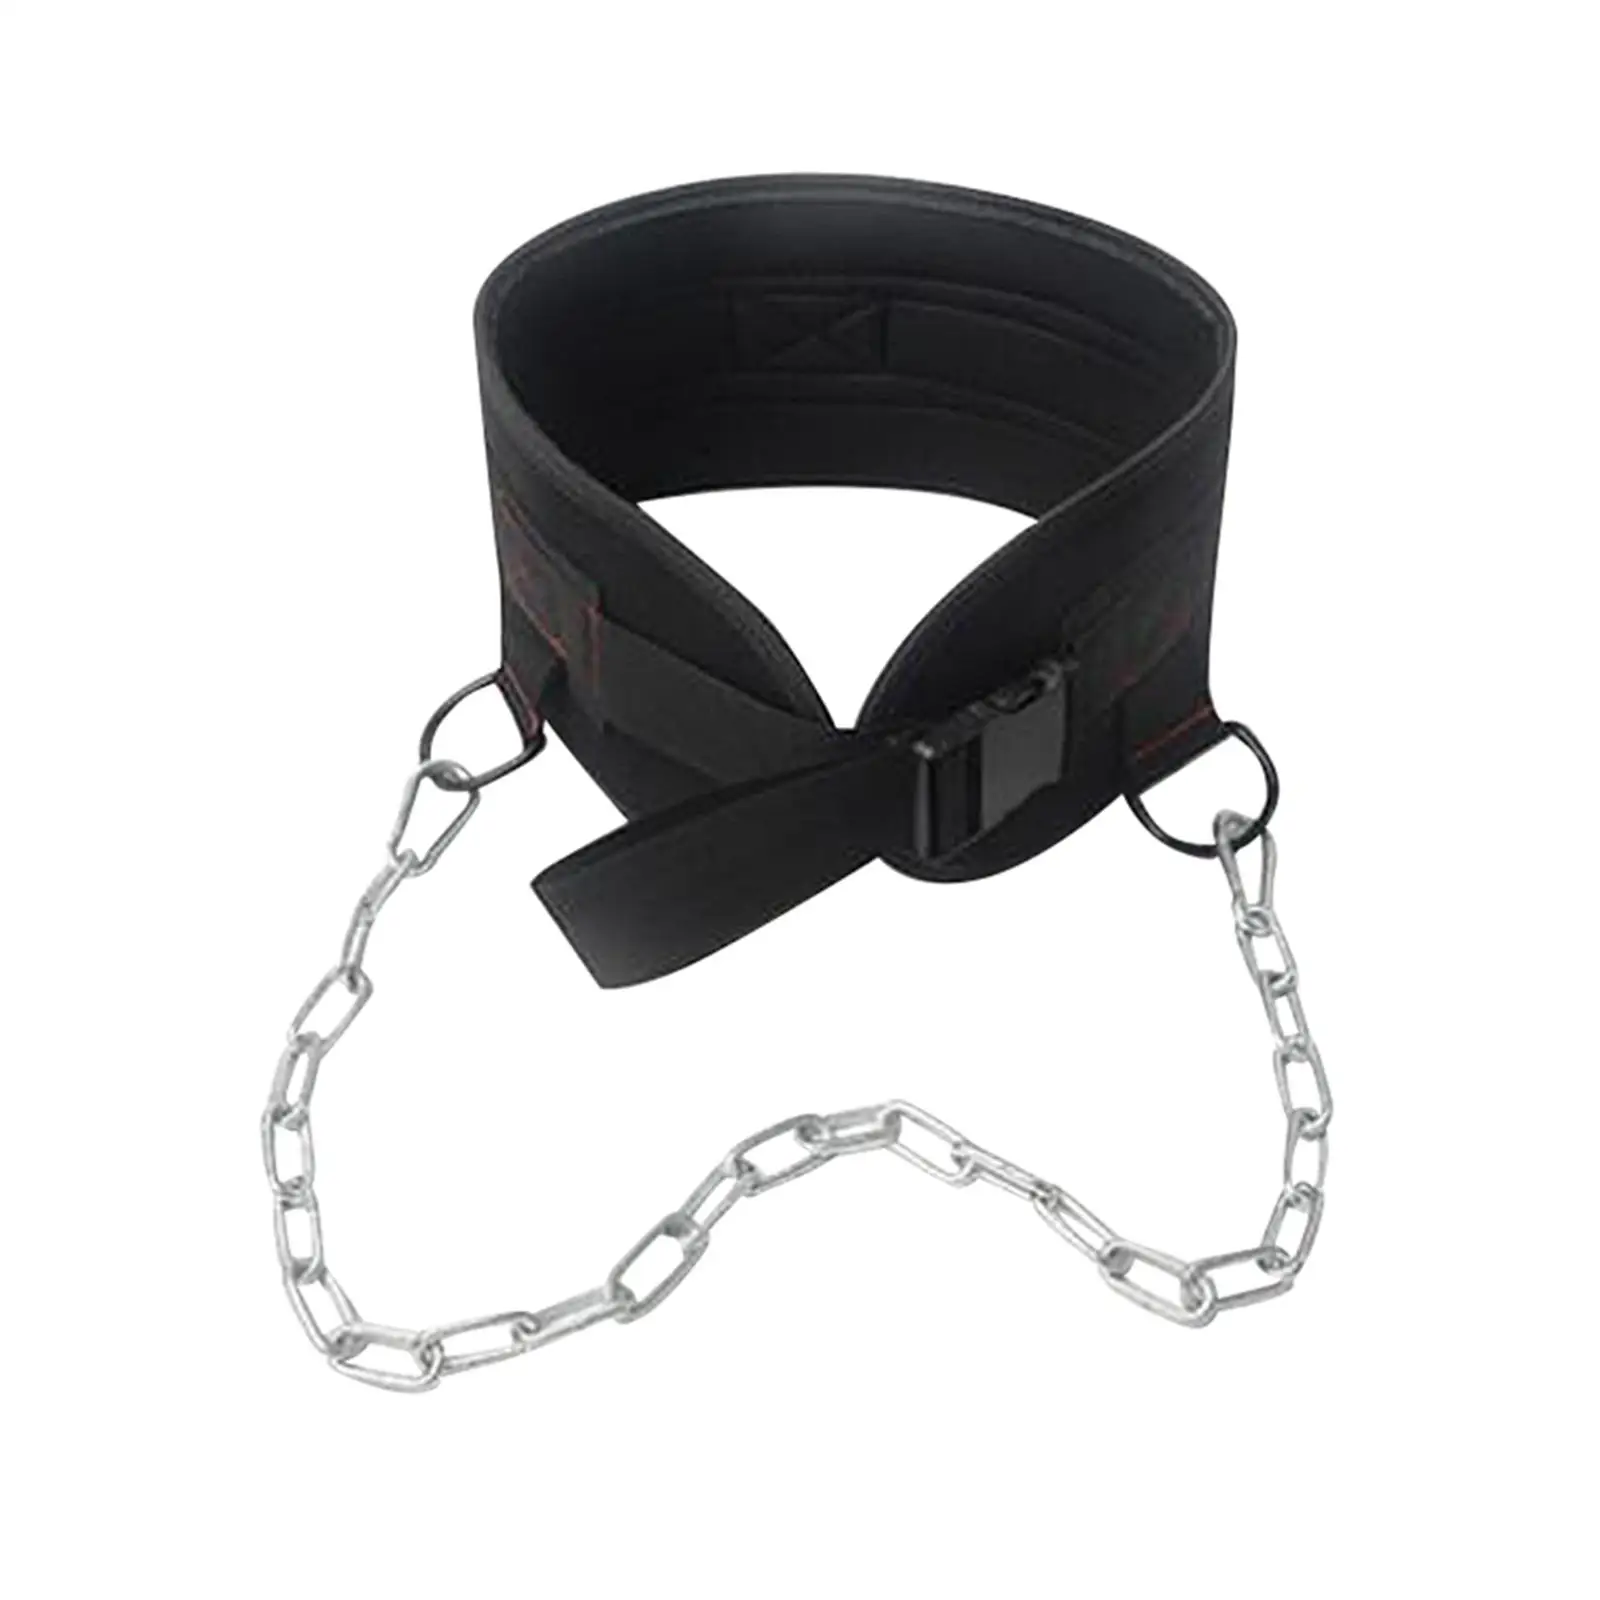 Weightlifting Dipping Belt Comfortable Waist with Chain for Workout